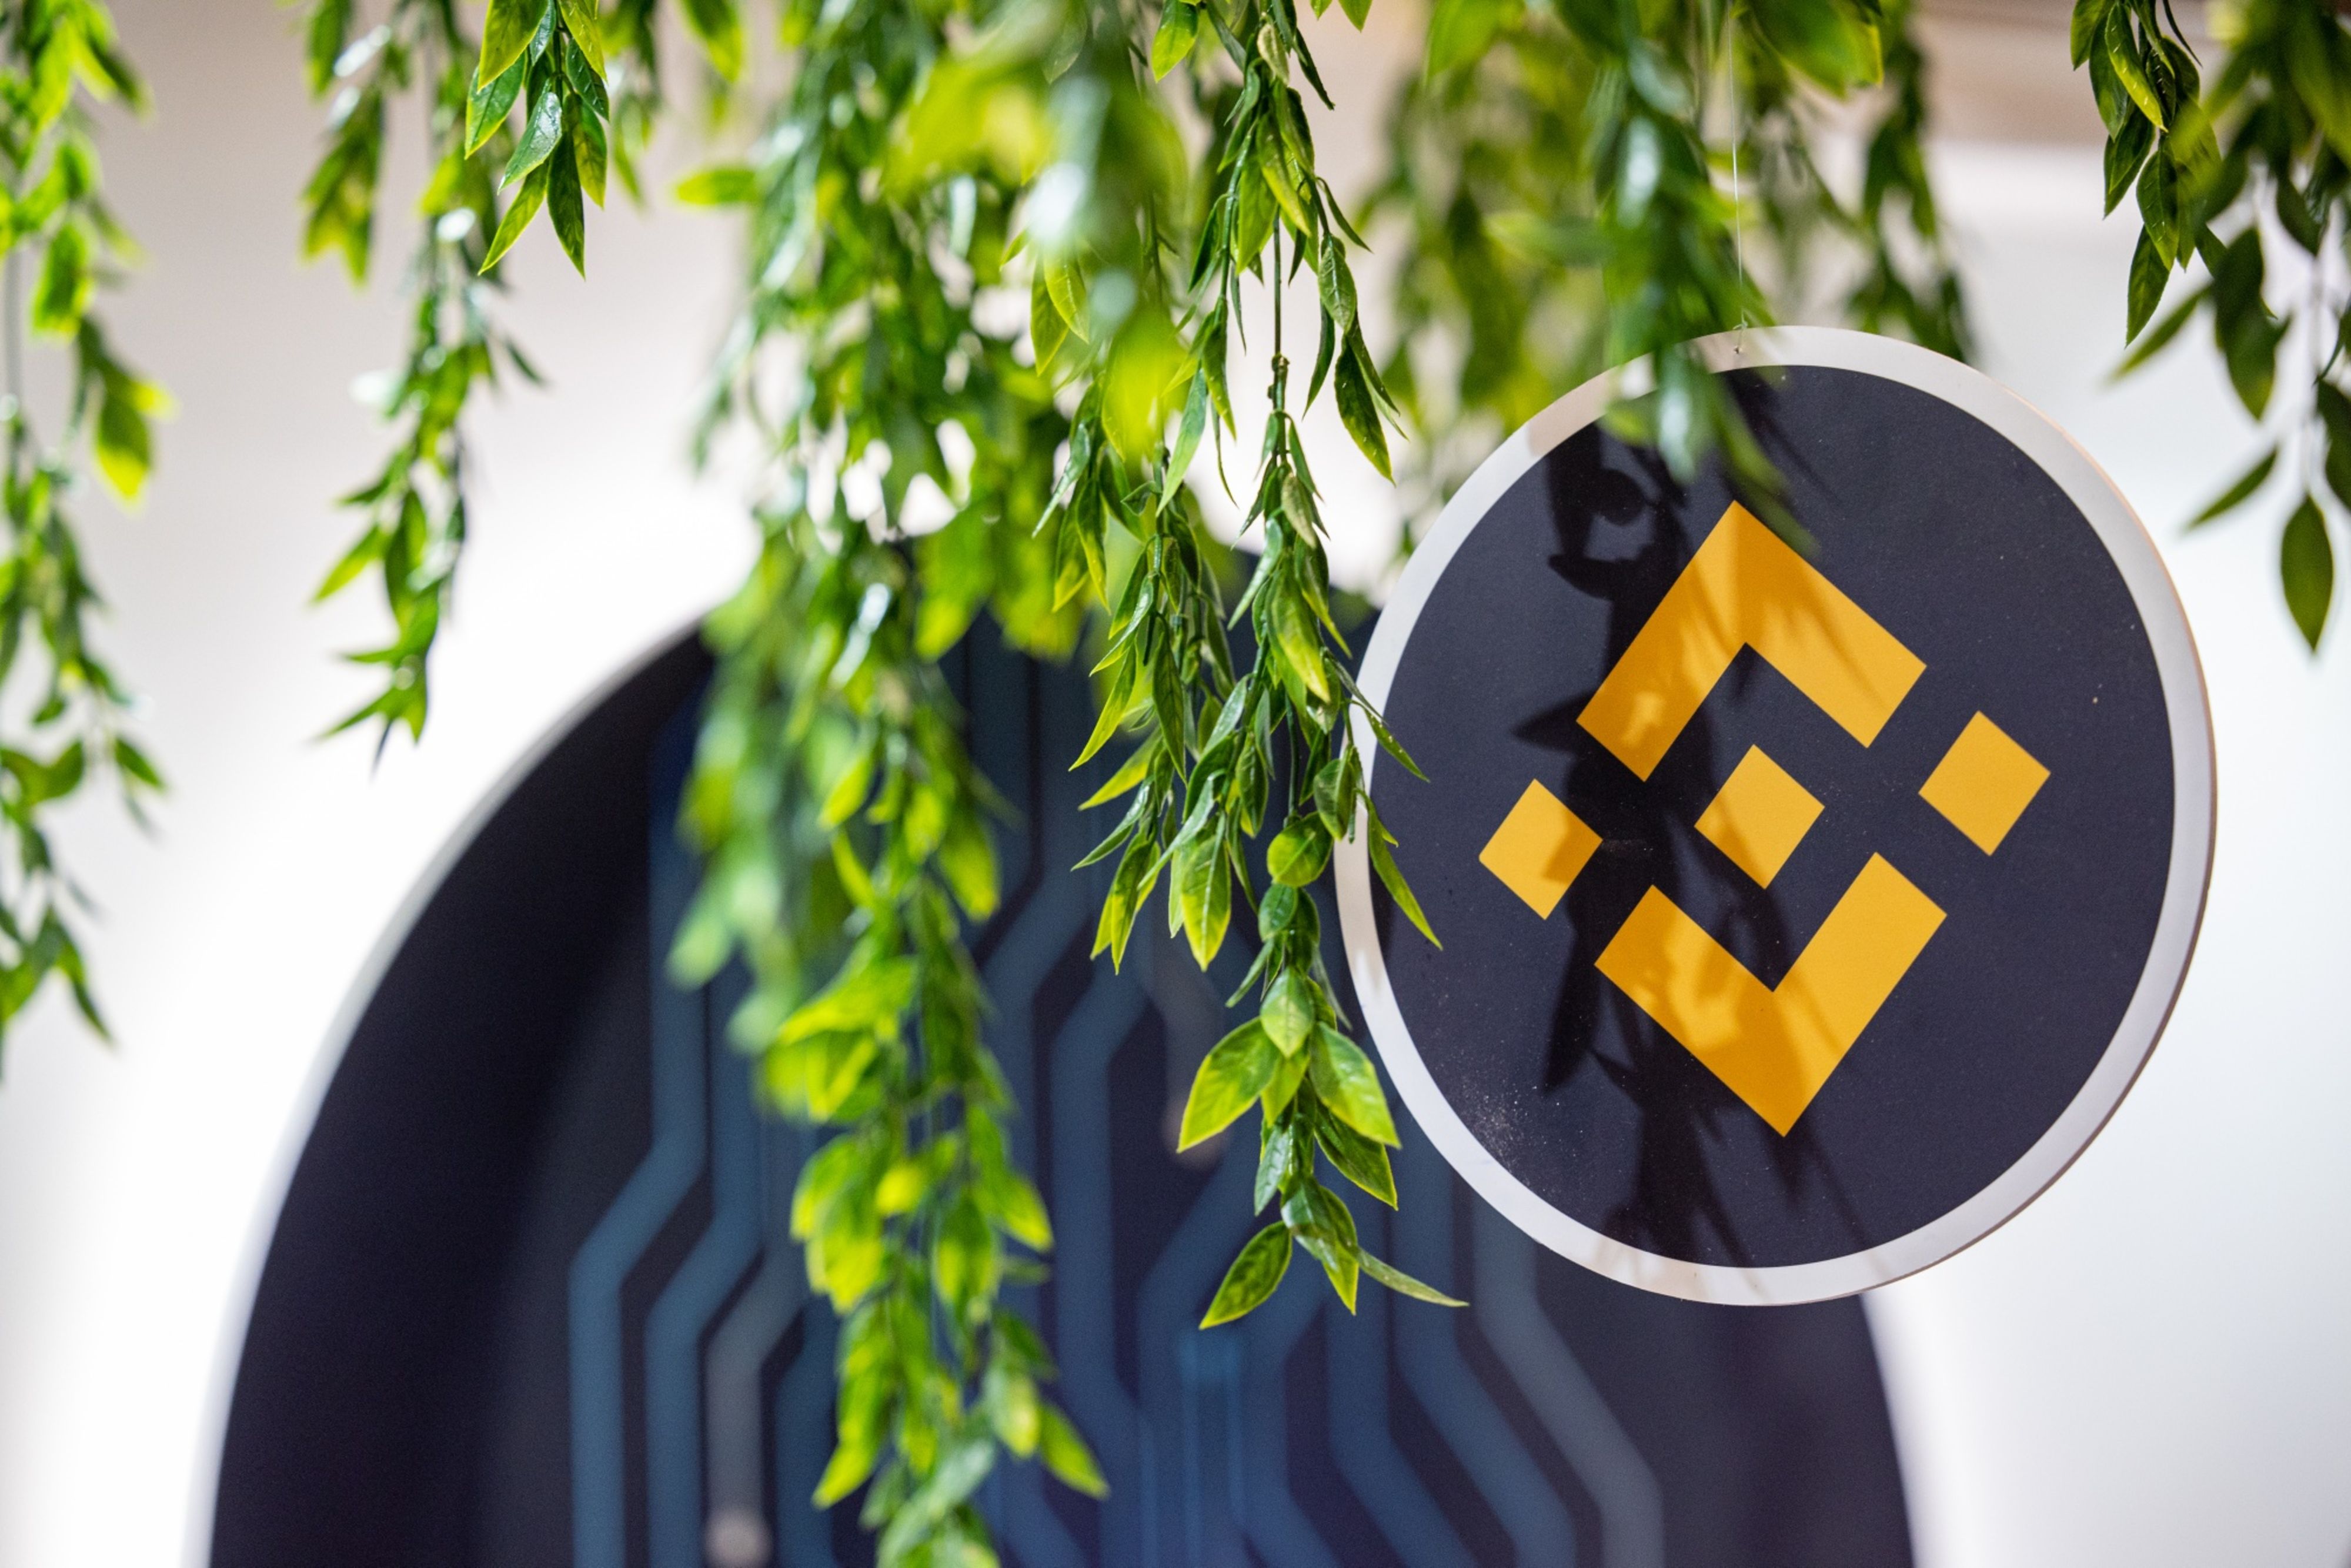 Binance is facing US investigations over a possible breach of its…